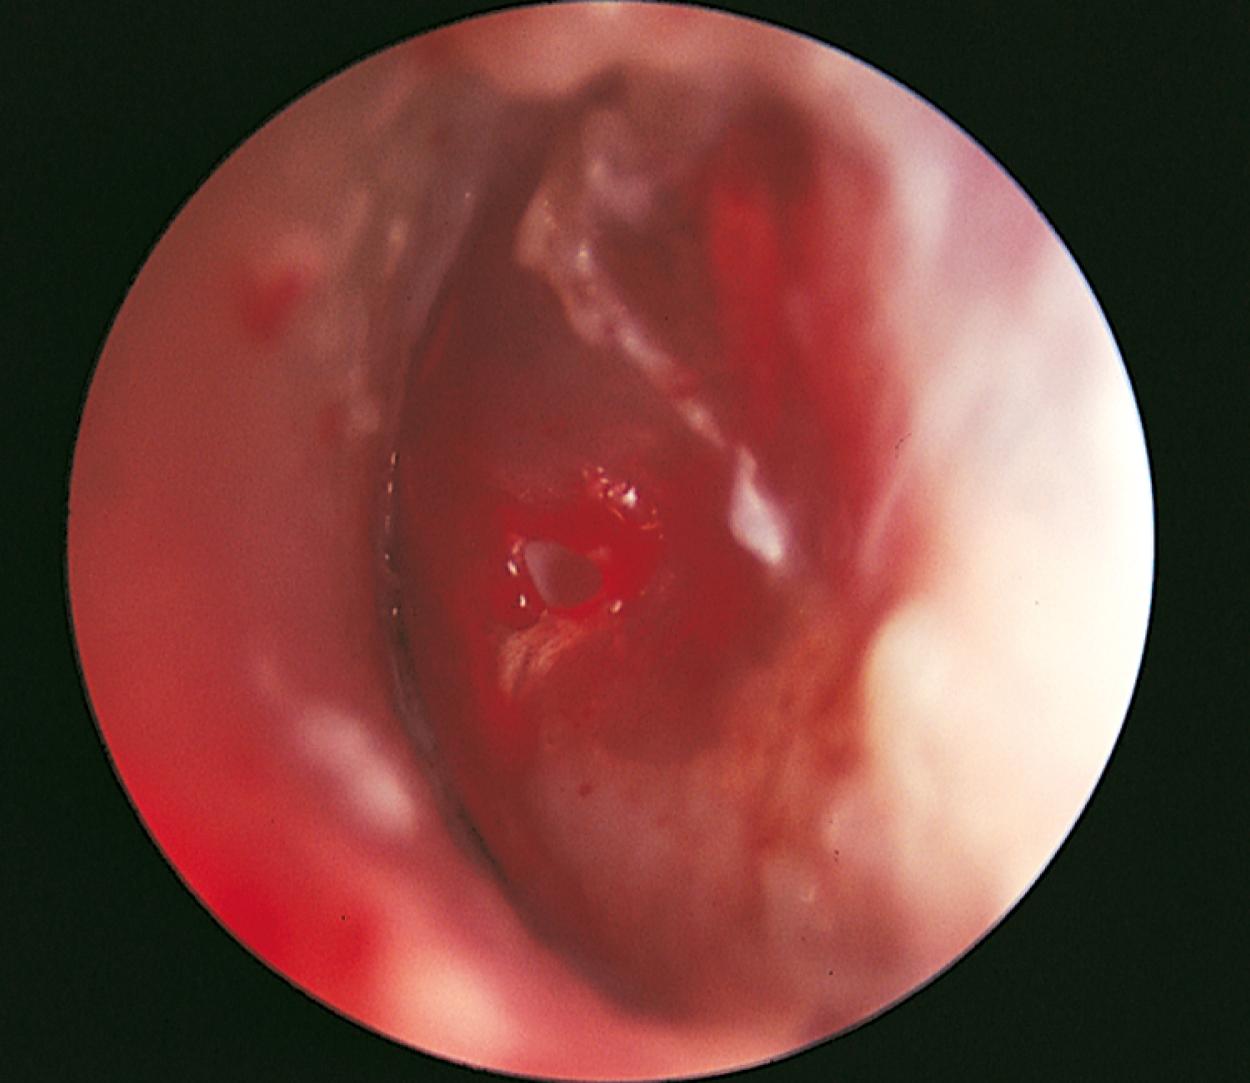 Fig. 24.26, Acute otitis media with perforation. In this child, increased middle ear pressure with acute otitis resulted in perforation of the tympanic membrane. The drum is thickened, and the perforation is seen at the 9 o’clock position.